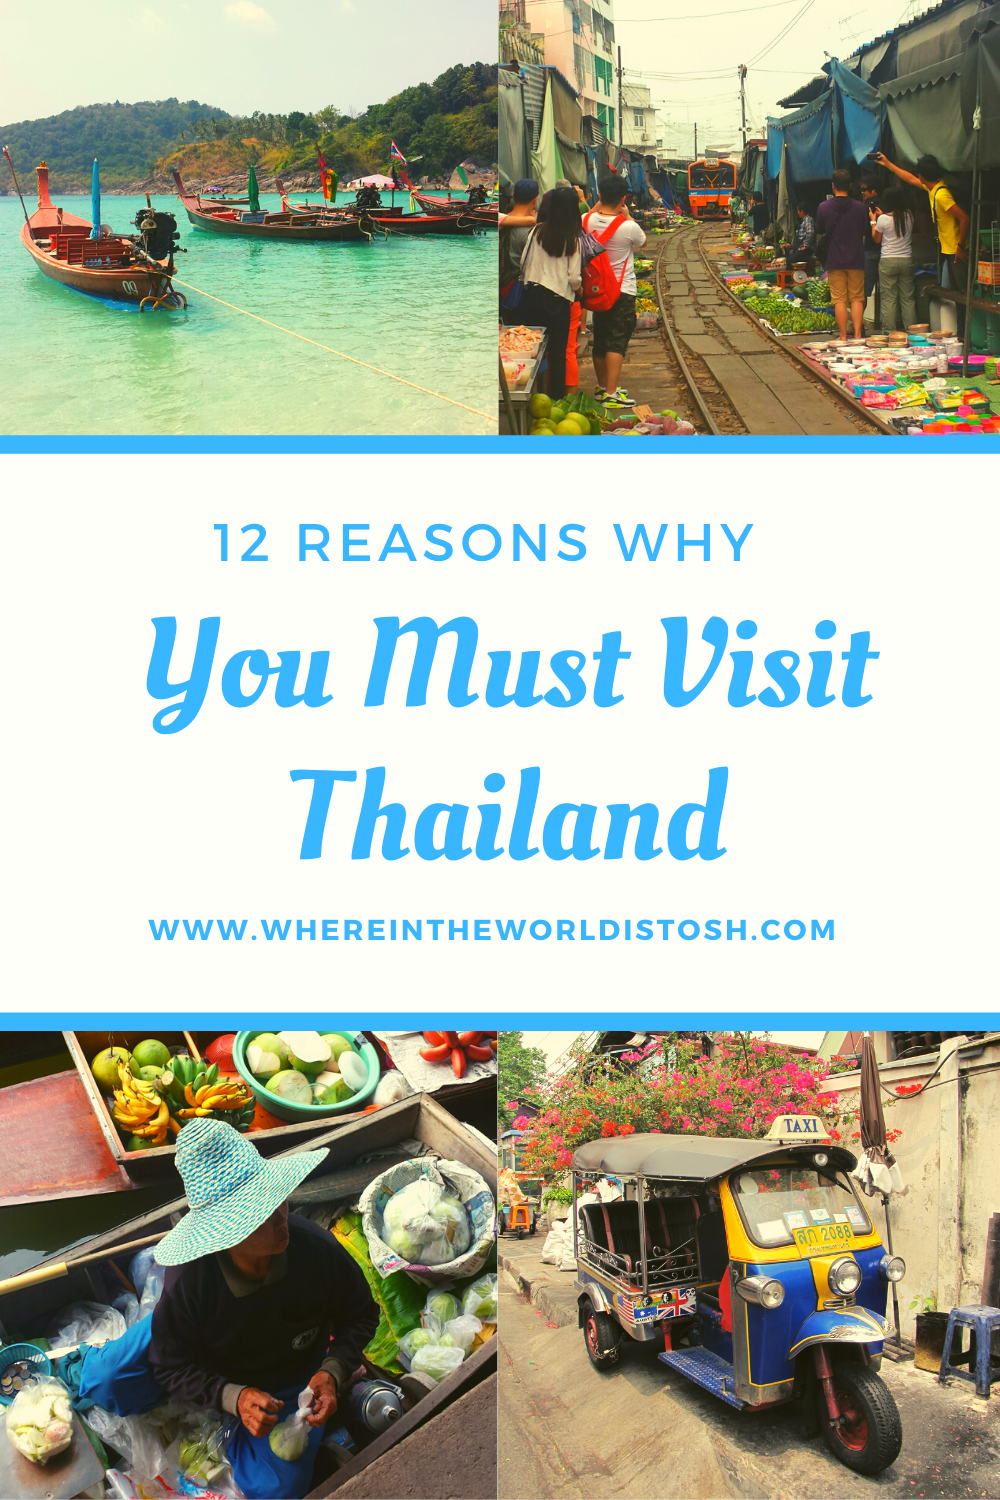 12 Reasons Why You Must Visit Thailand